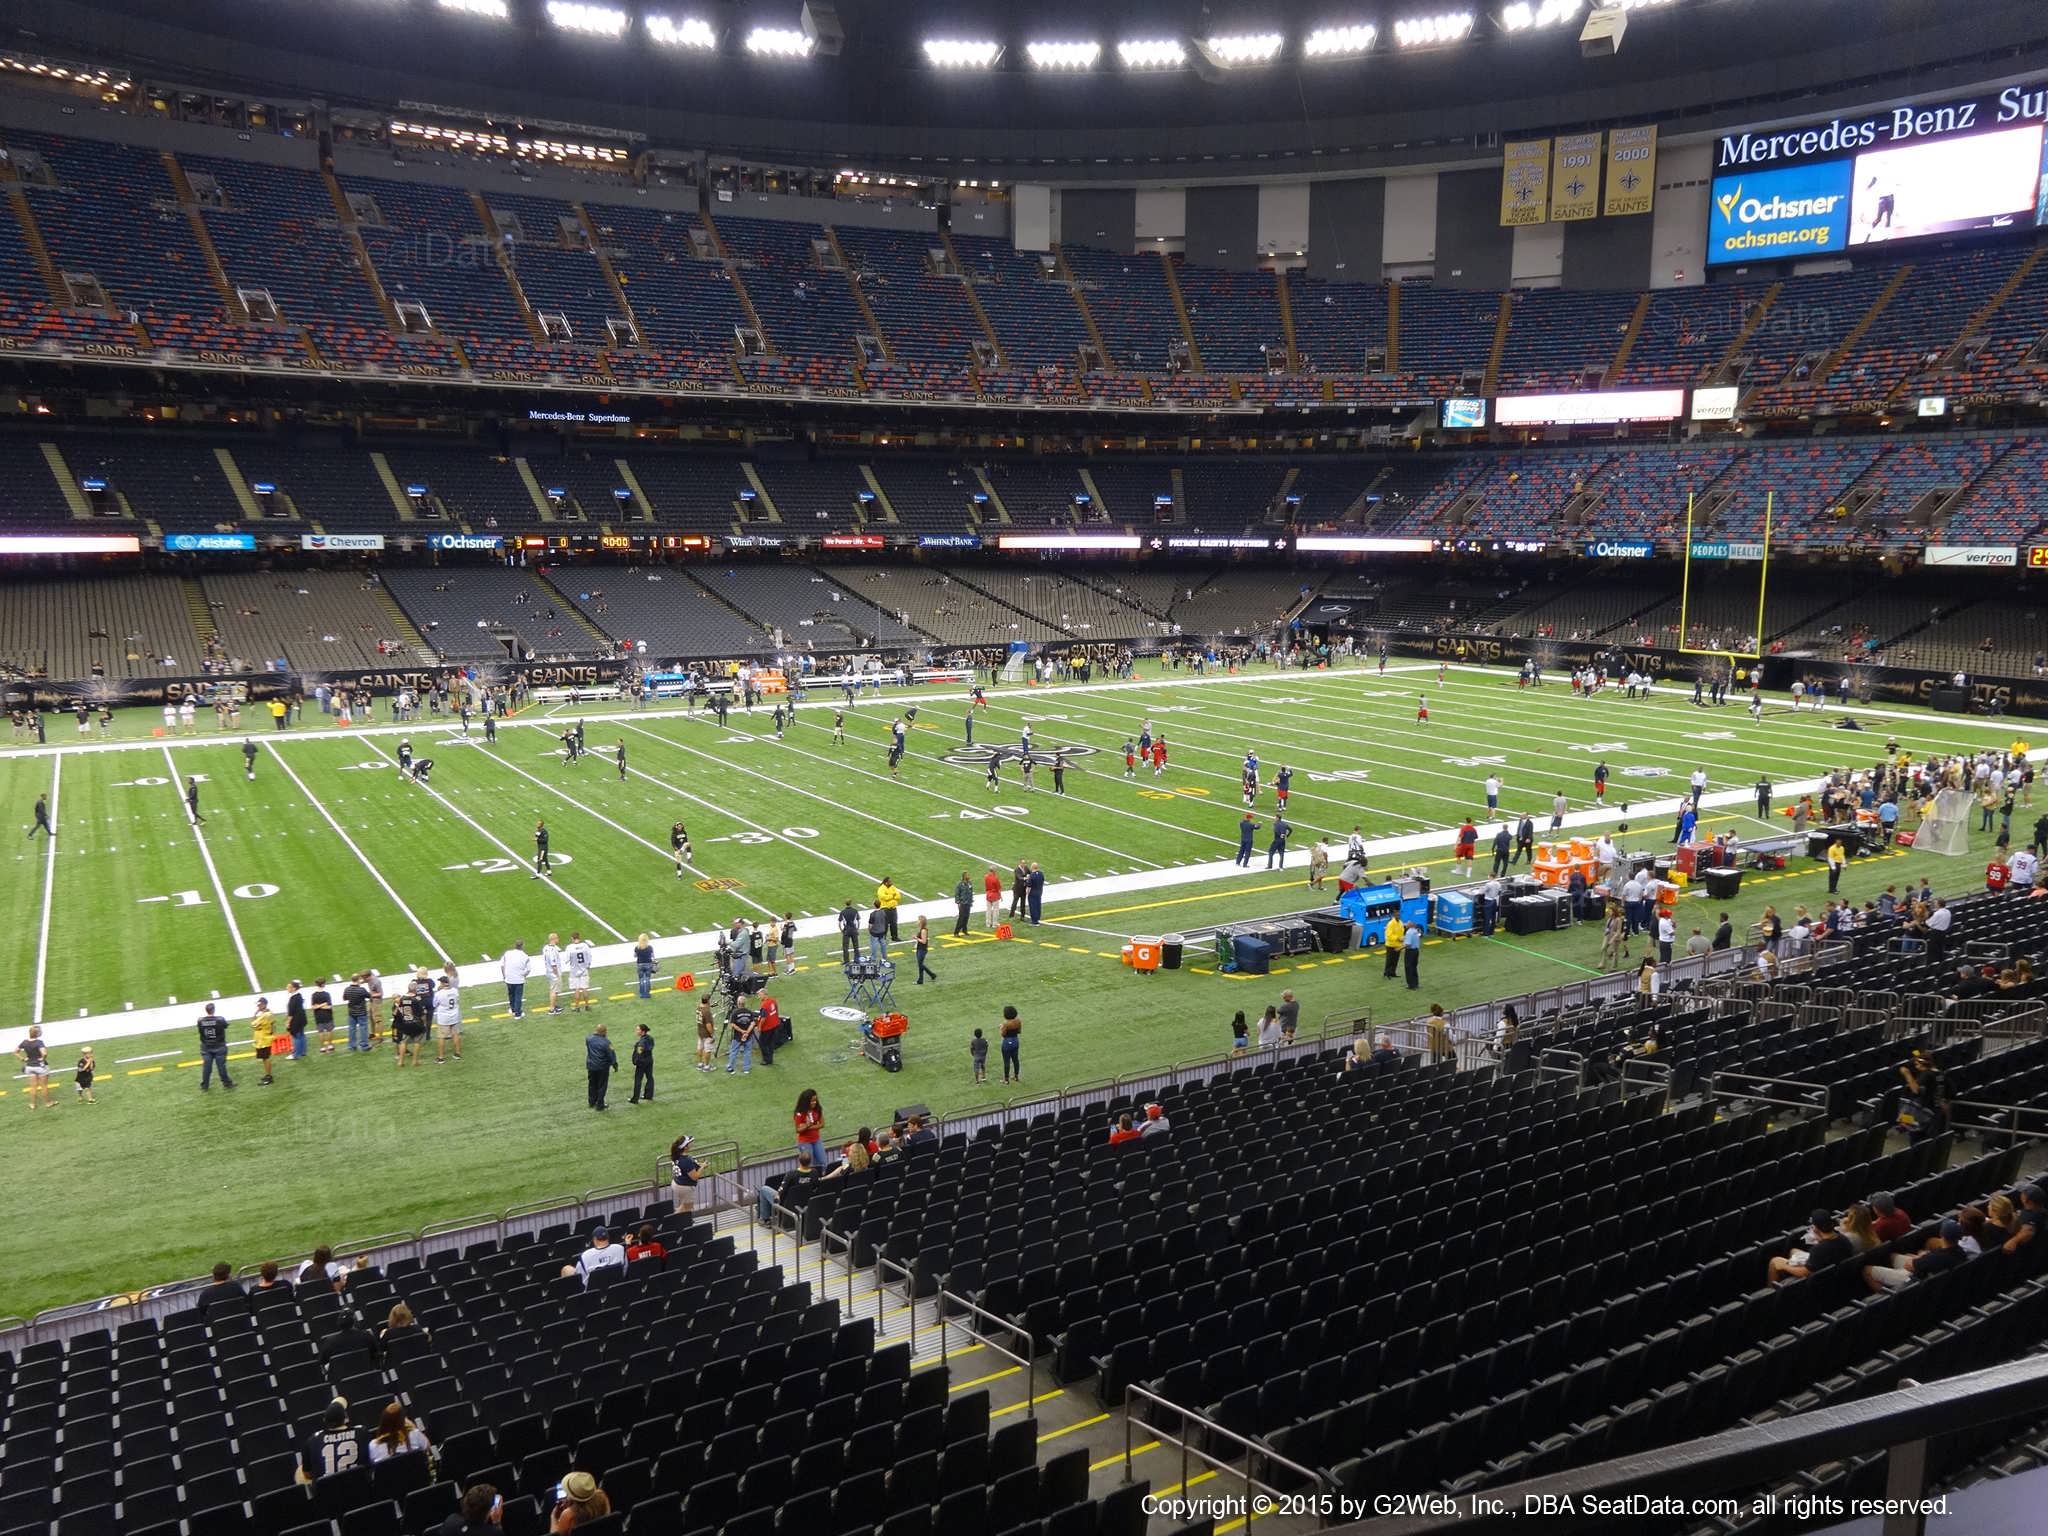 Seat view from section 229 at the Mercedes-Benz Superdome, home of the New Orleans Saints